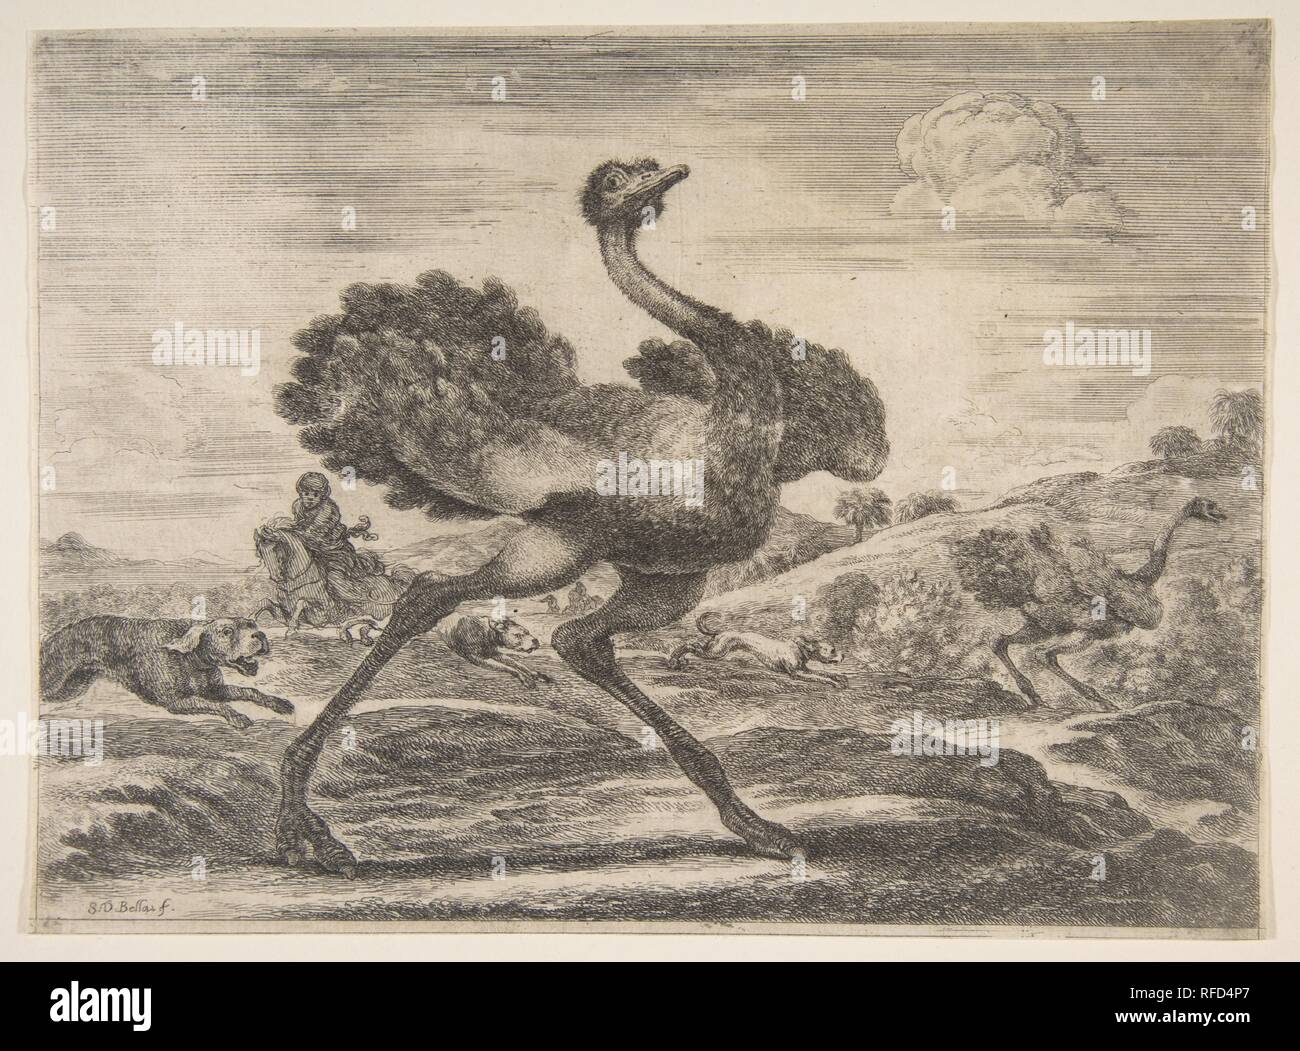 Ostrich hunt, from 'Animal hunts' (Chasses à différents animaux). Artist: Stefano della Bella (Italian, Florence 1610-1664 Florence). Dimensions: Sheet (trimmed to plate): 6 5/16 × 8 5/8 in. (16.1 × 21.9 cm). Series/Portfolio: 'Animal hunts' (Chasses à différents animaux). Date: ca. 1654. Museum: Metropolitan Museum of Art, New York, USA. Stock Photo